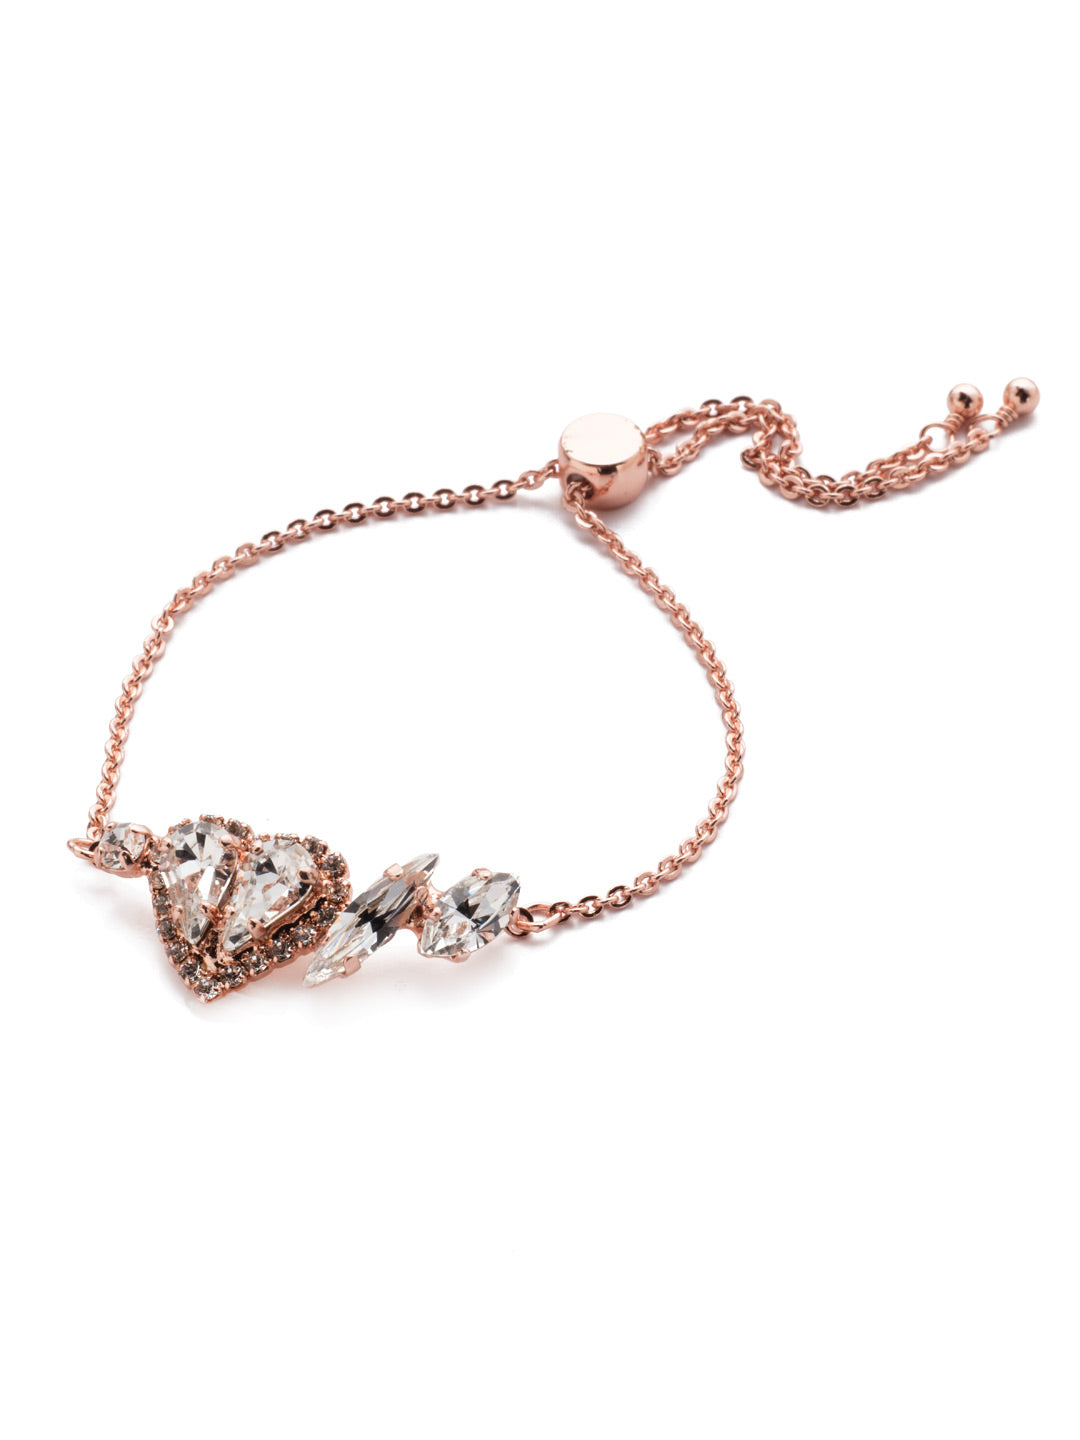 Vida Slider Bracelet - BER12RGCRY - <p>In the Vida Slider Bracelet, a classic beauty gets a bit of edge when a sparkling crystal heart is joined with interesting crystal shapes including a sharp navette stone. From Sorrelli's Crystal collection in our Rose Gold-tone finish.</p>